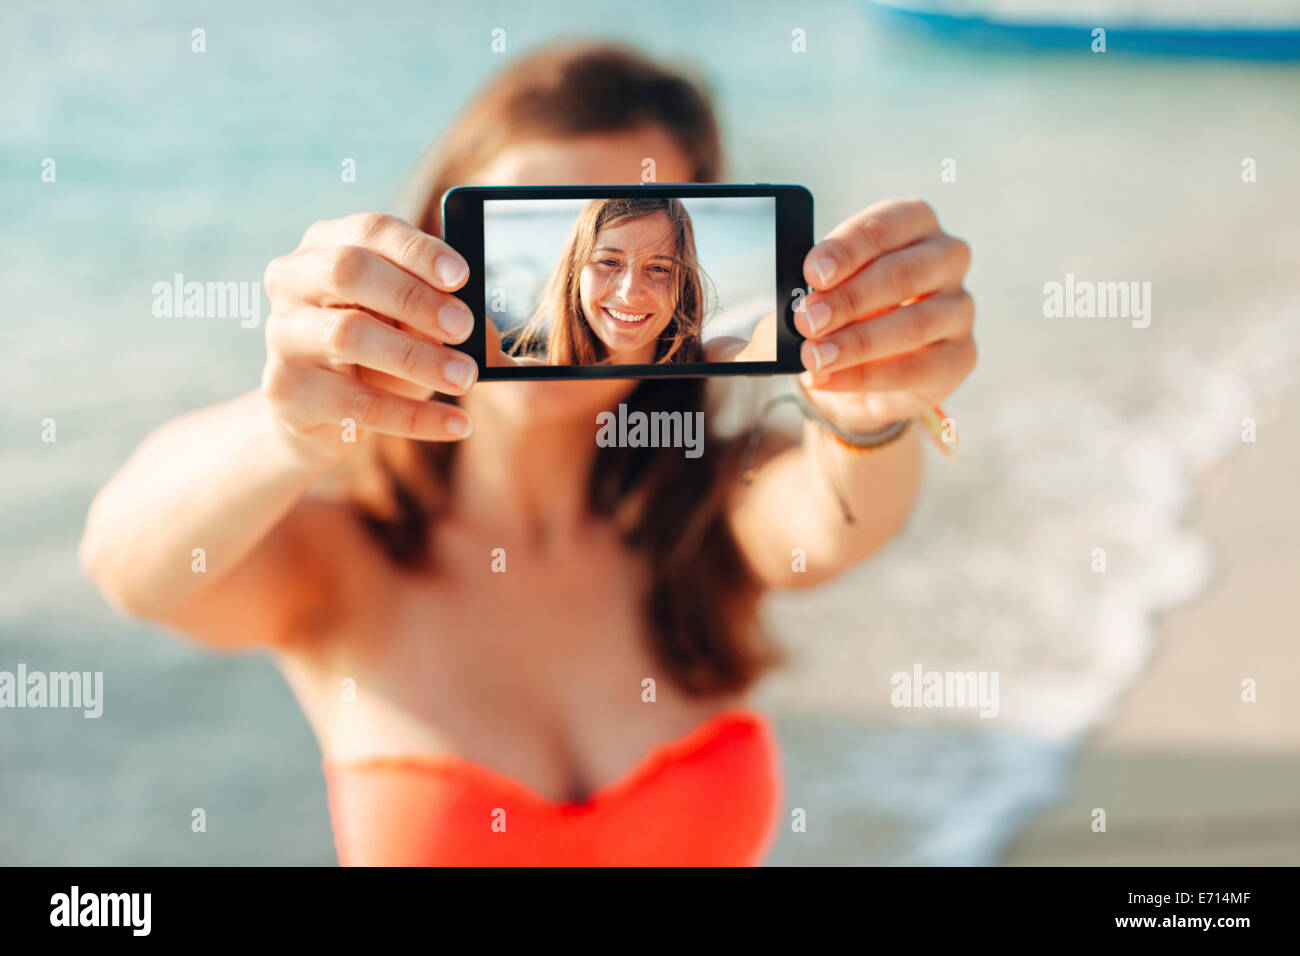 Indonesia, Gili Islands, woman on the beach showing smartphone with her selfie Stock Photo